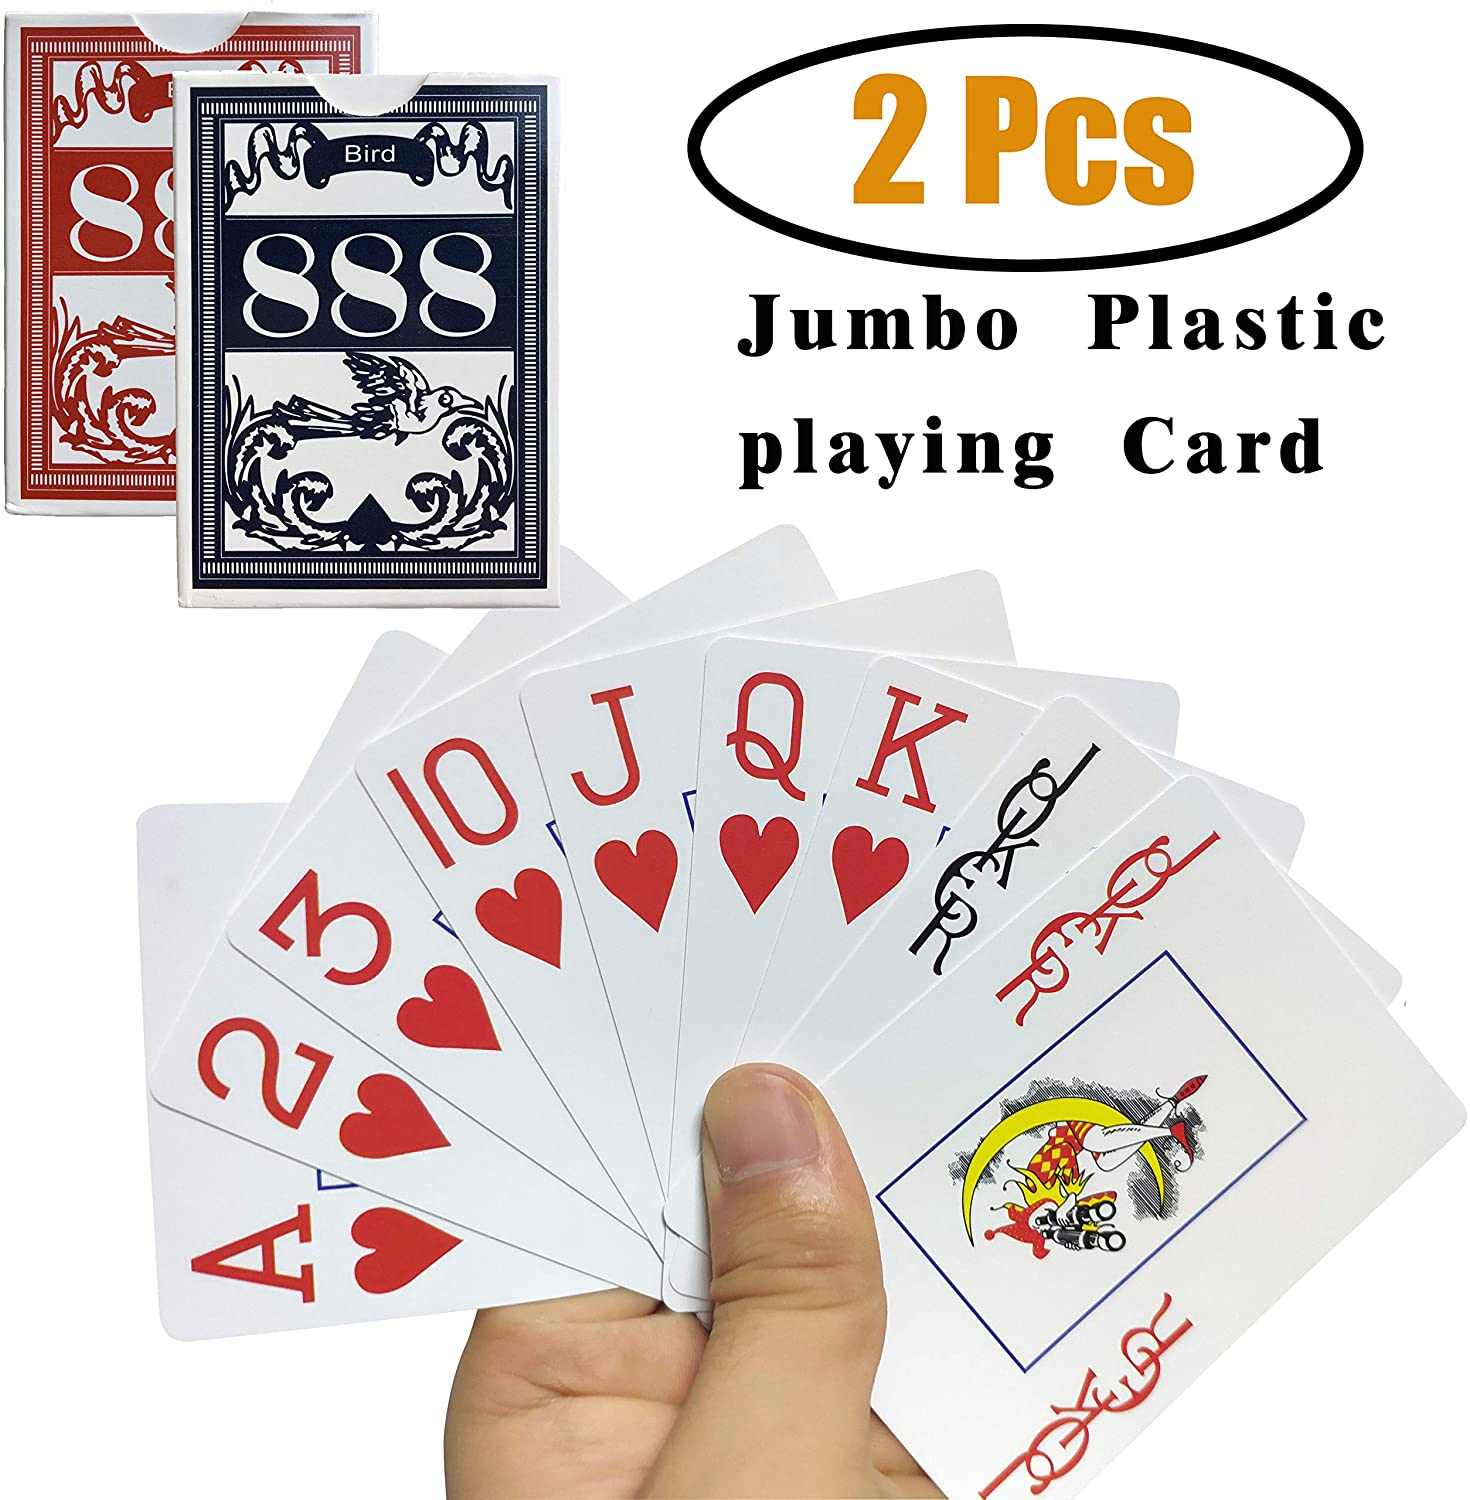 Blackjack Pinochle Euchre for Magic Props Pool Beach Water Games Neasyth Waterproof Plastic Playing Cards,Jumbo Index for Texas Holdem 